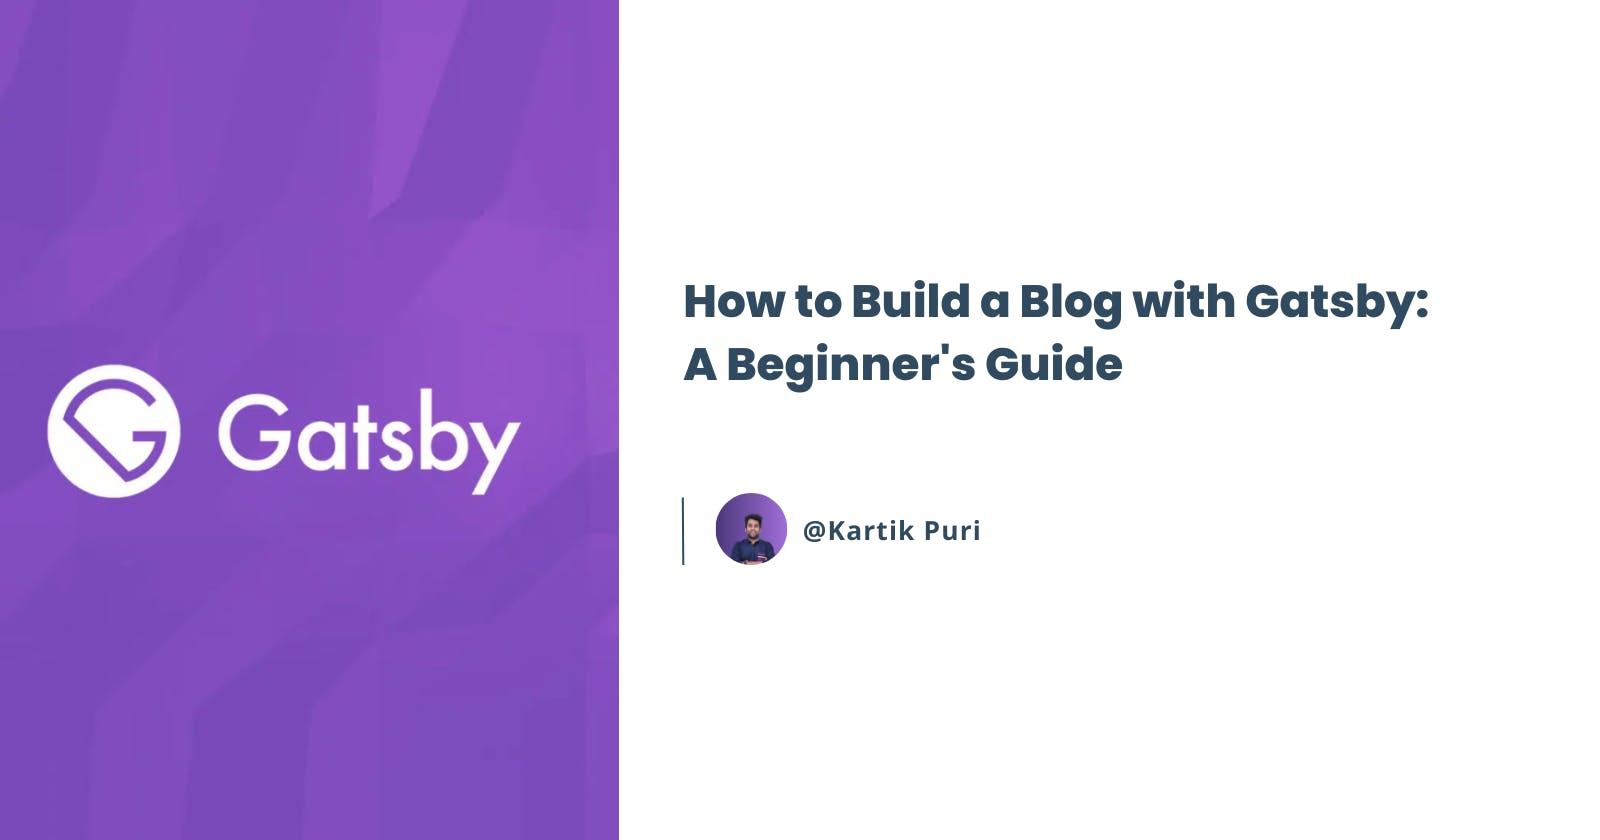 How to Build a Blog with Gatsby: A Beginner's Guide